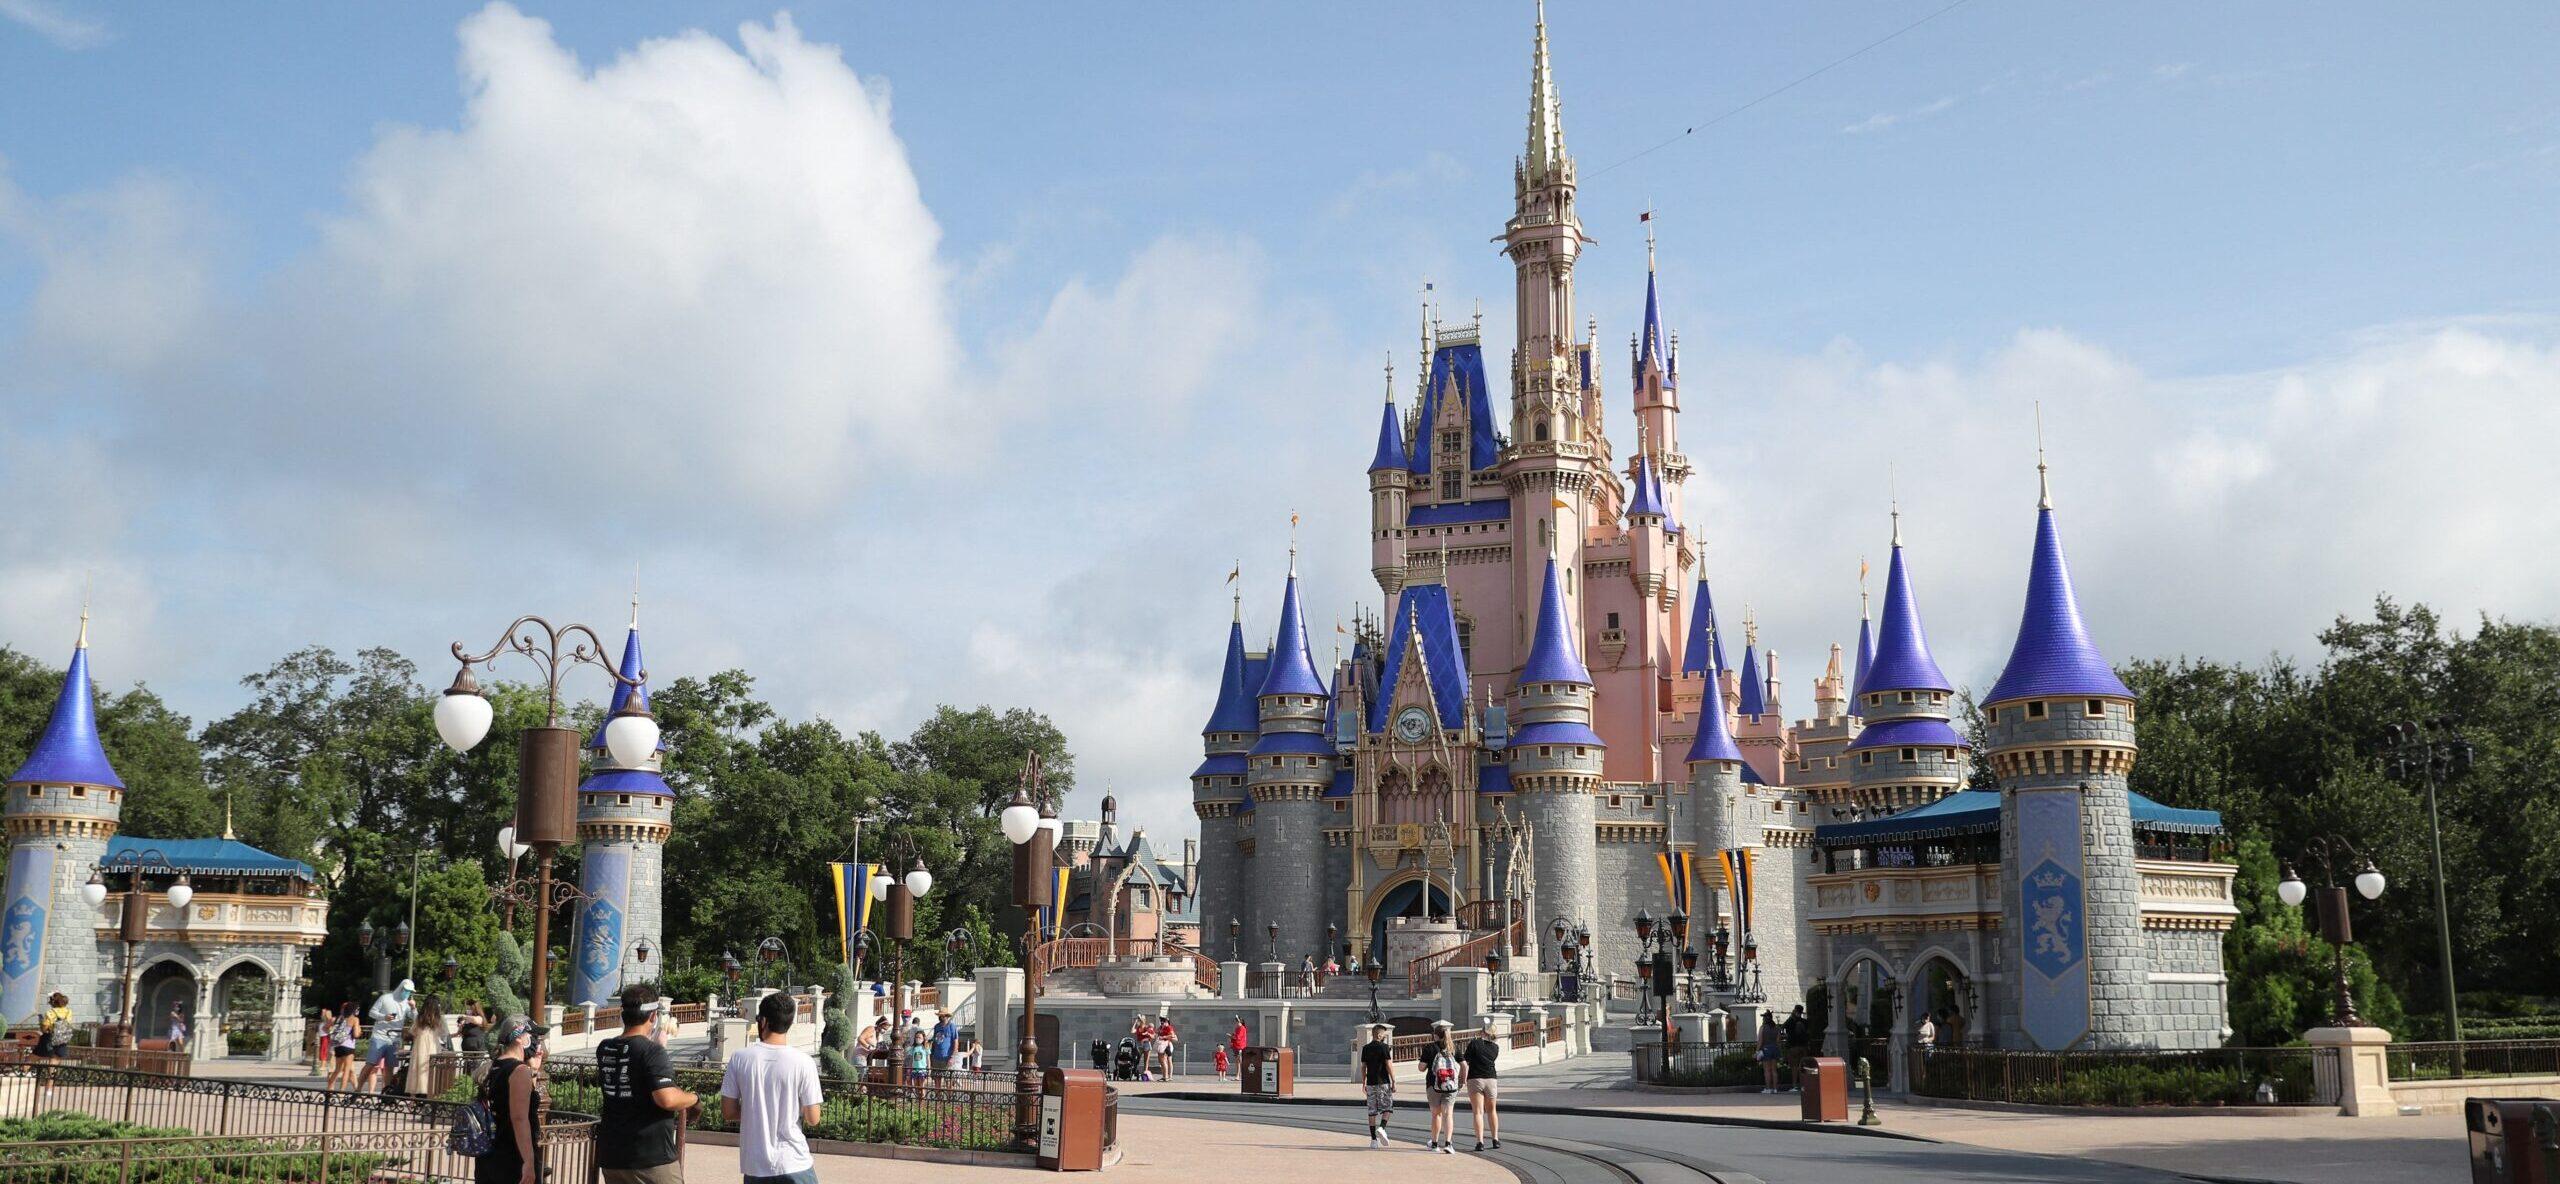 Multiple Injuries Reported At Disney World For Q1 2023